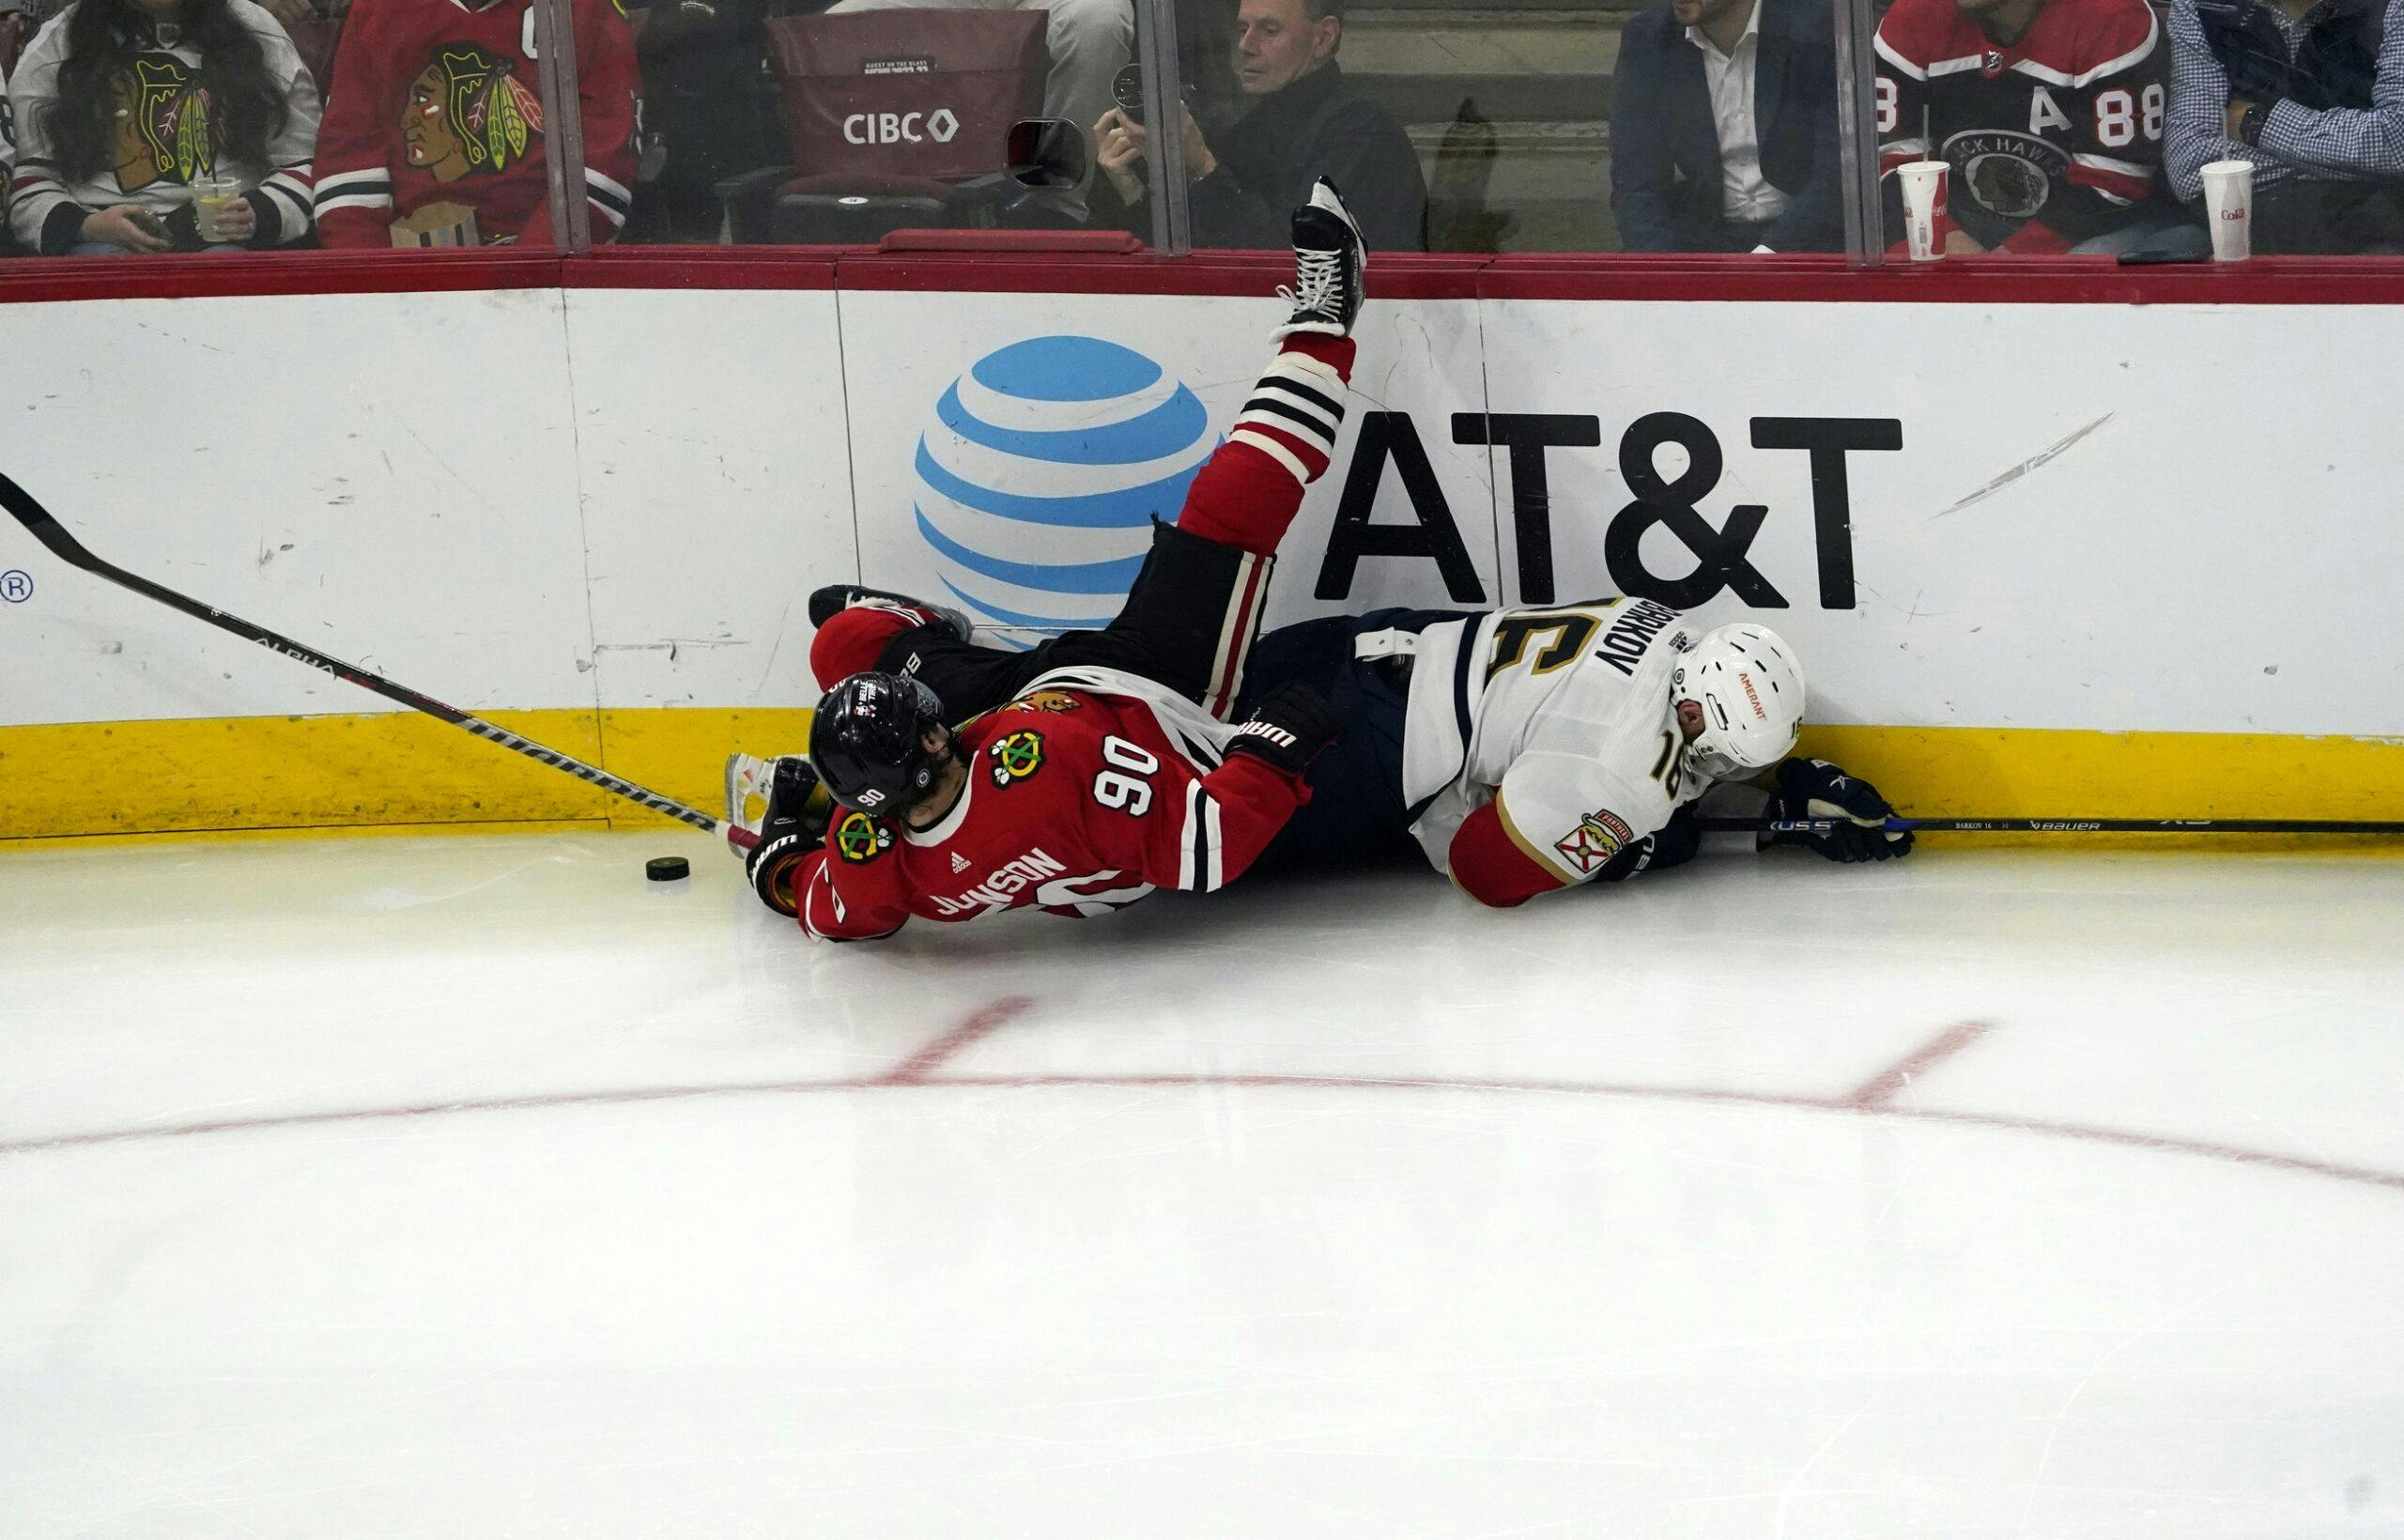 Chicago Blackhawks place Tyler Johnson on injured reserve with right ankle injury